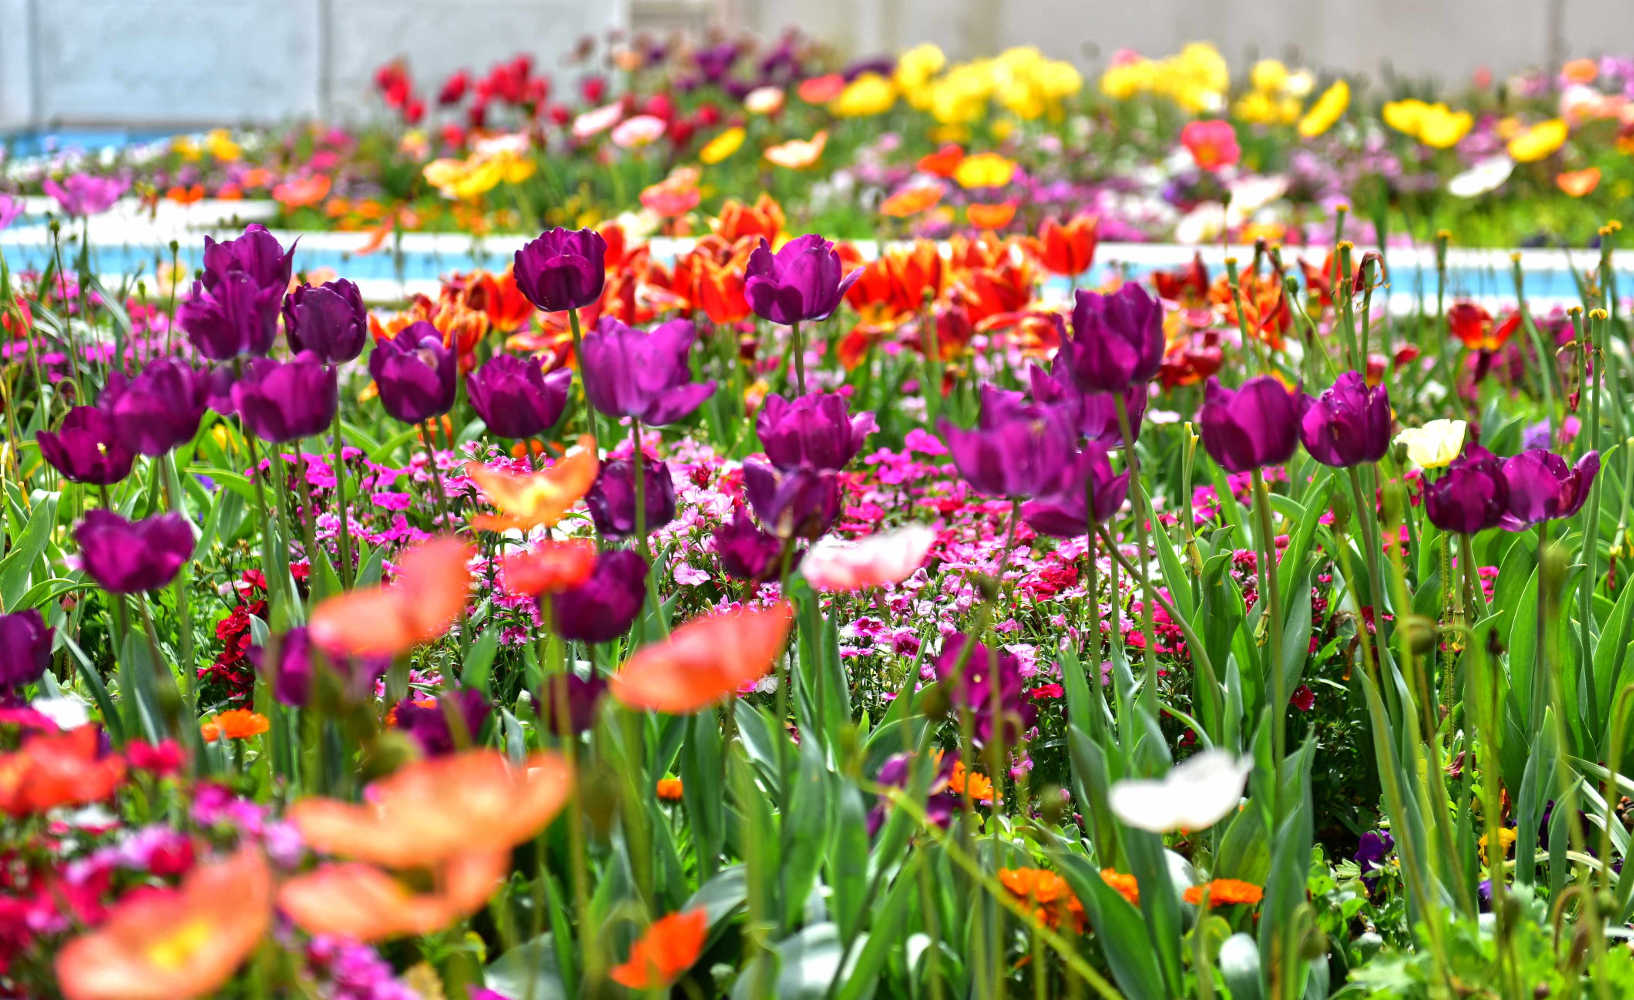 Tulips and other colorful flowers blooming in the Indian Char Bagh Garden in Hamilton Gardens, New Zealand